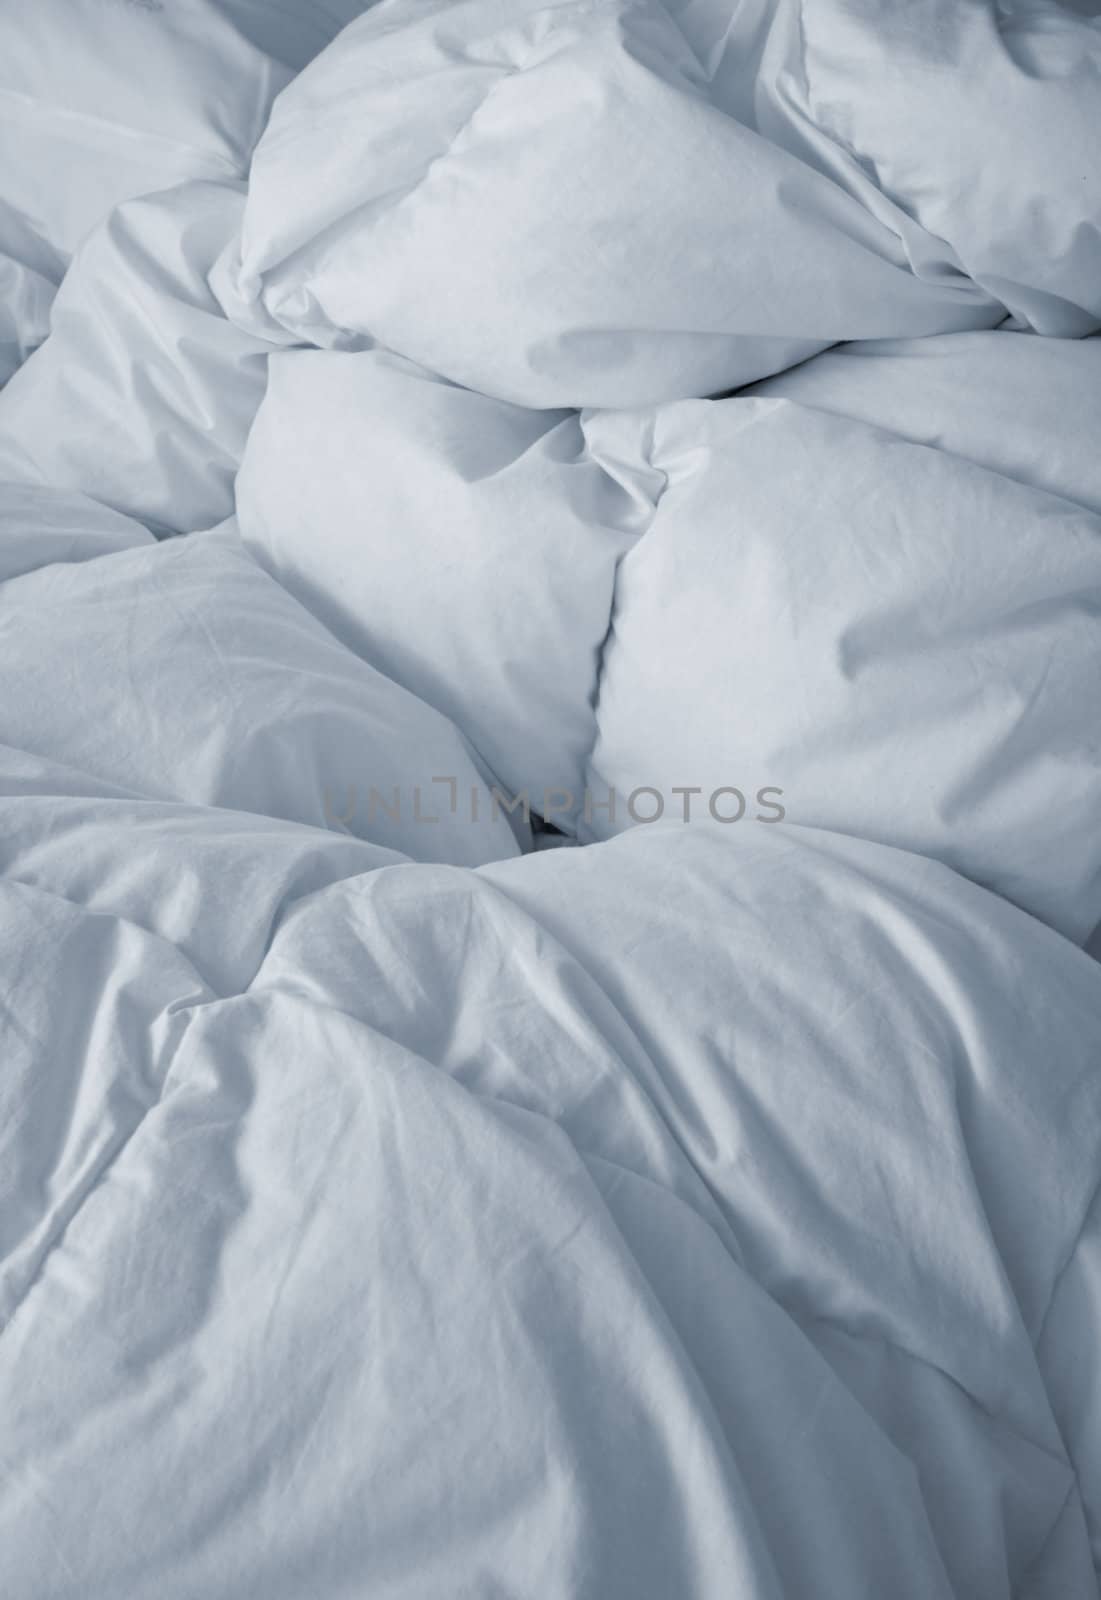 Bedclothes broken with white sheets in the morning. upright